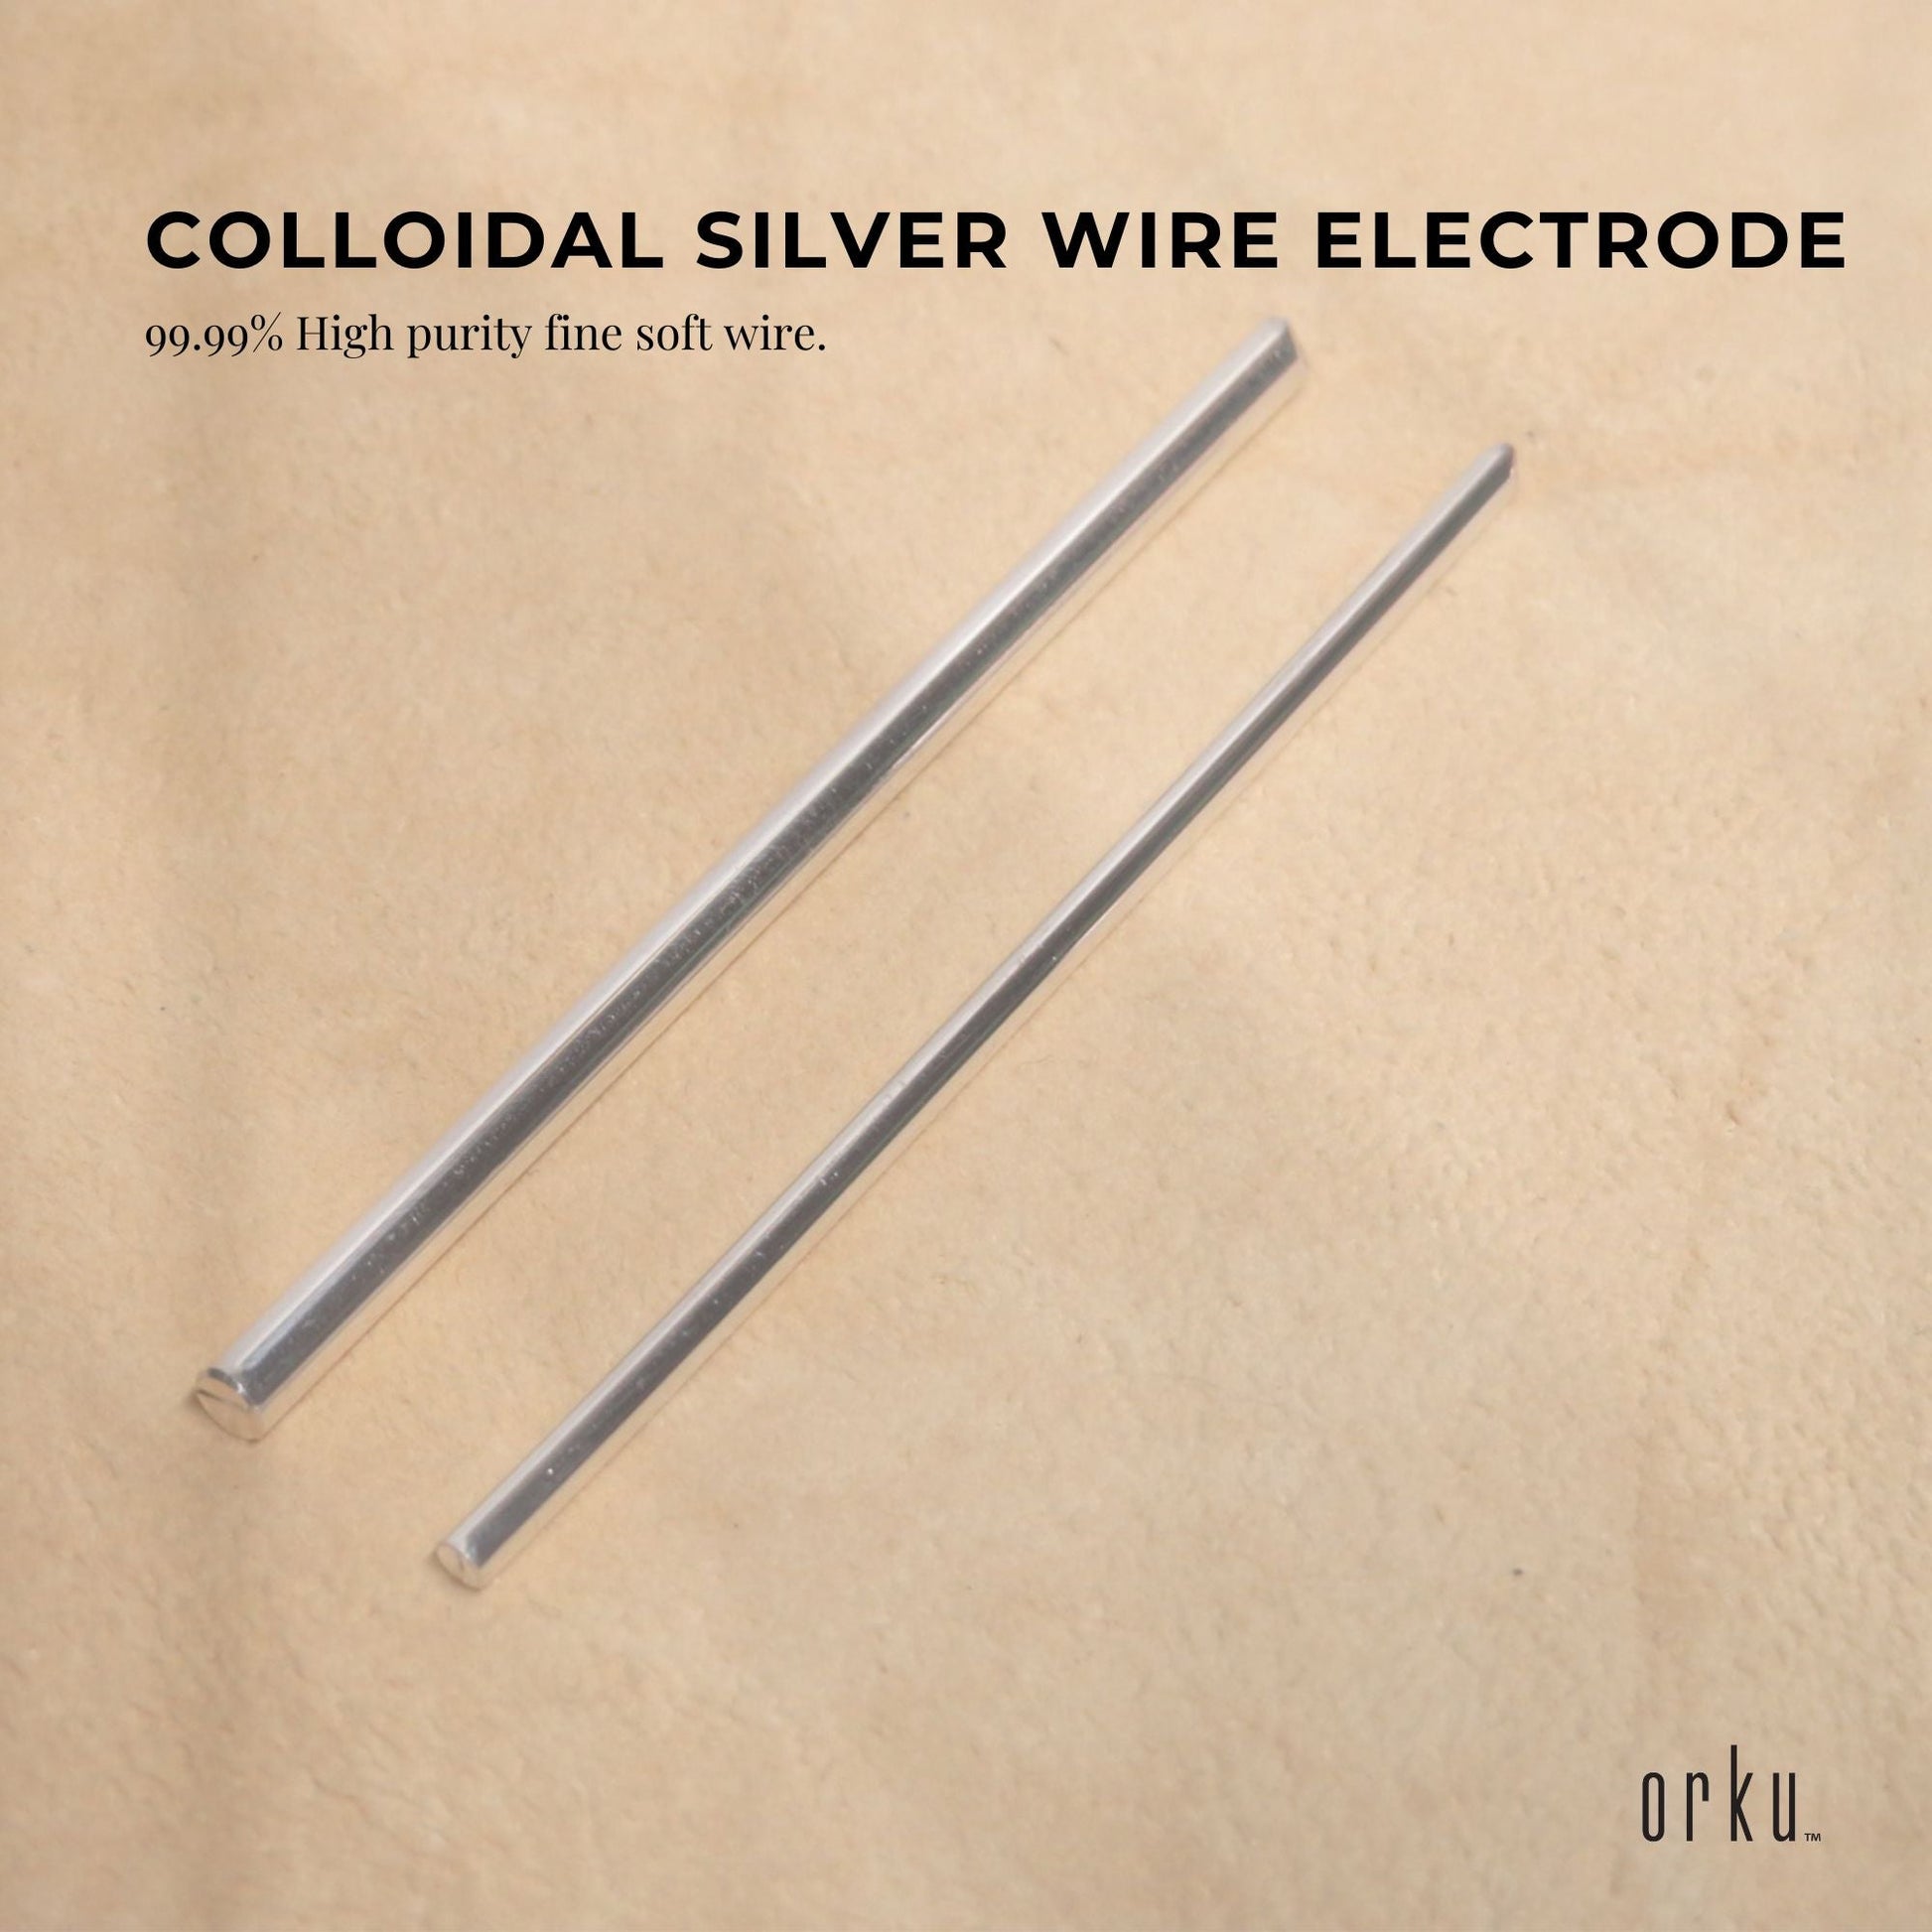 8" Silver Wire Rods 99.99% High Purity Fine Soft Pure Colloidal Electrode